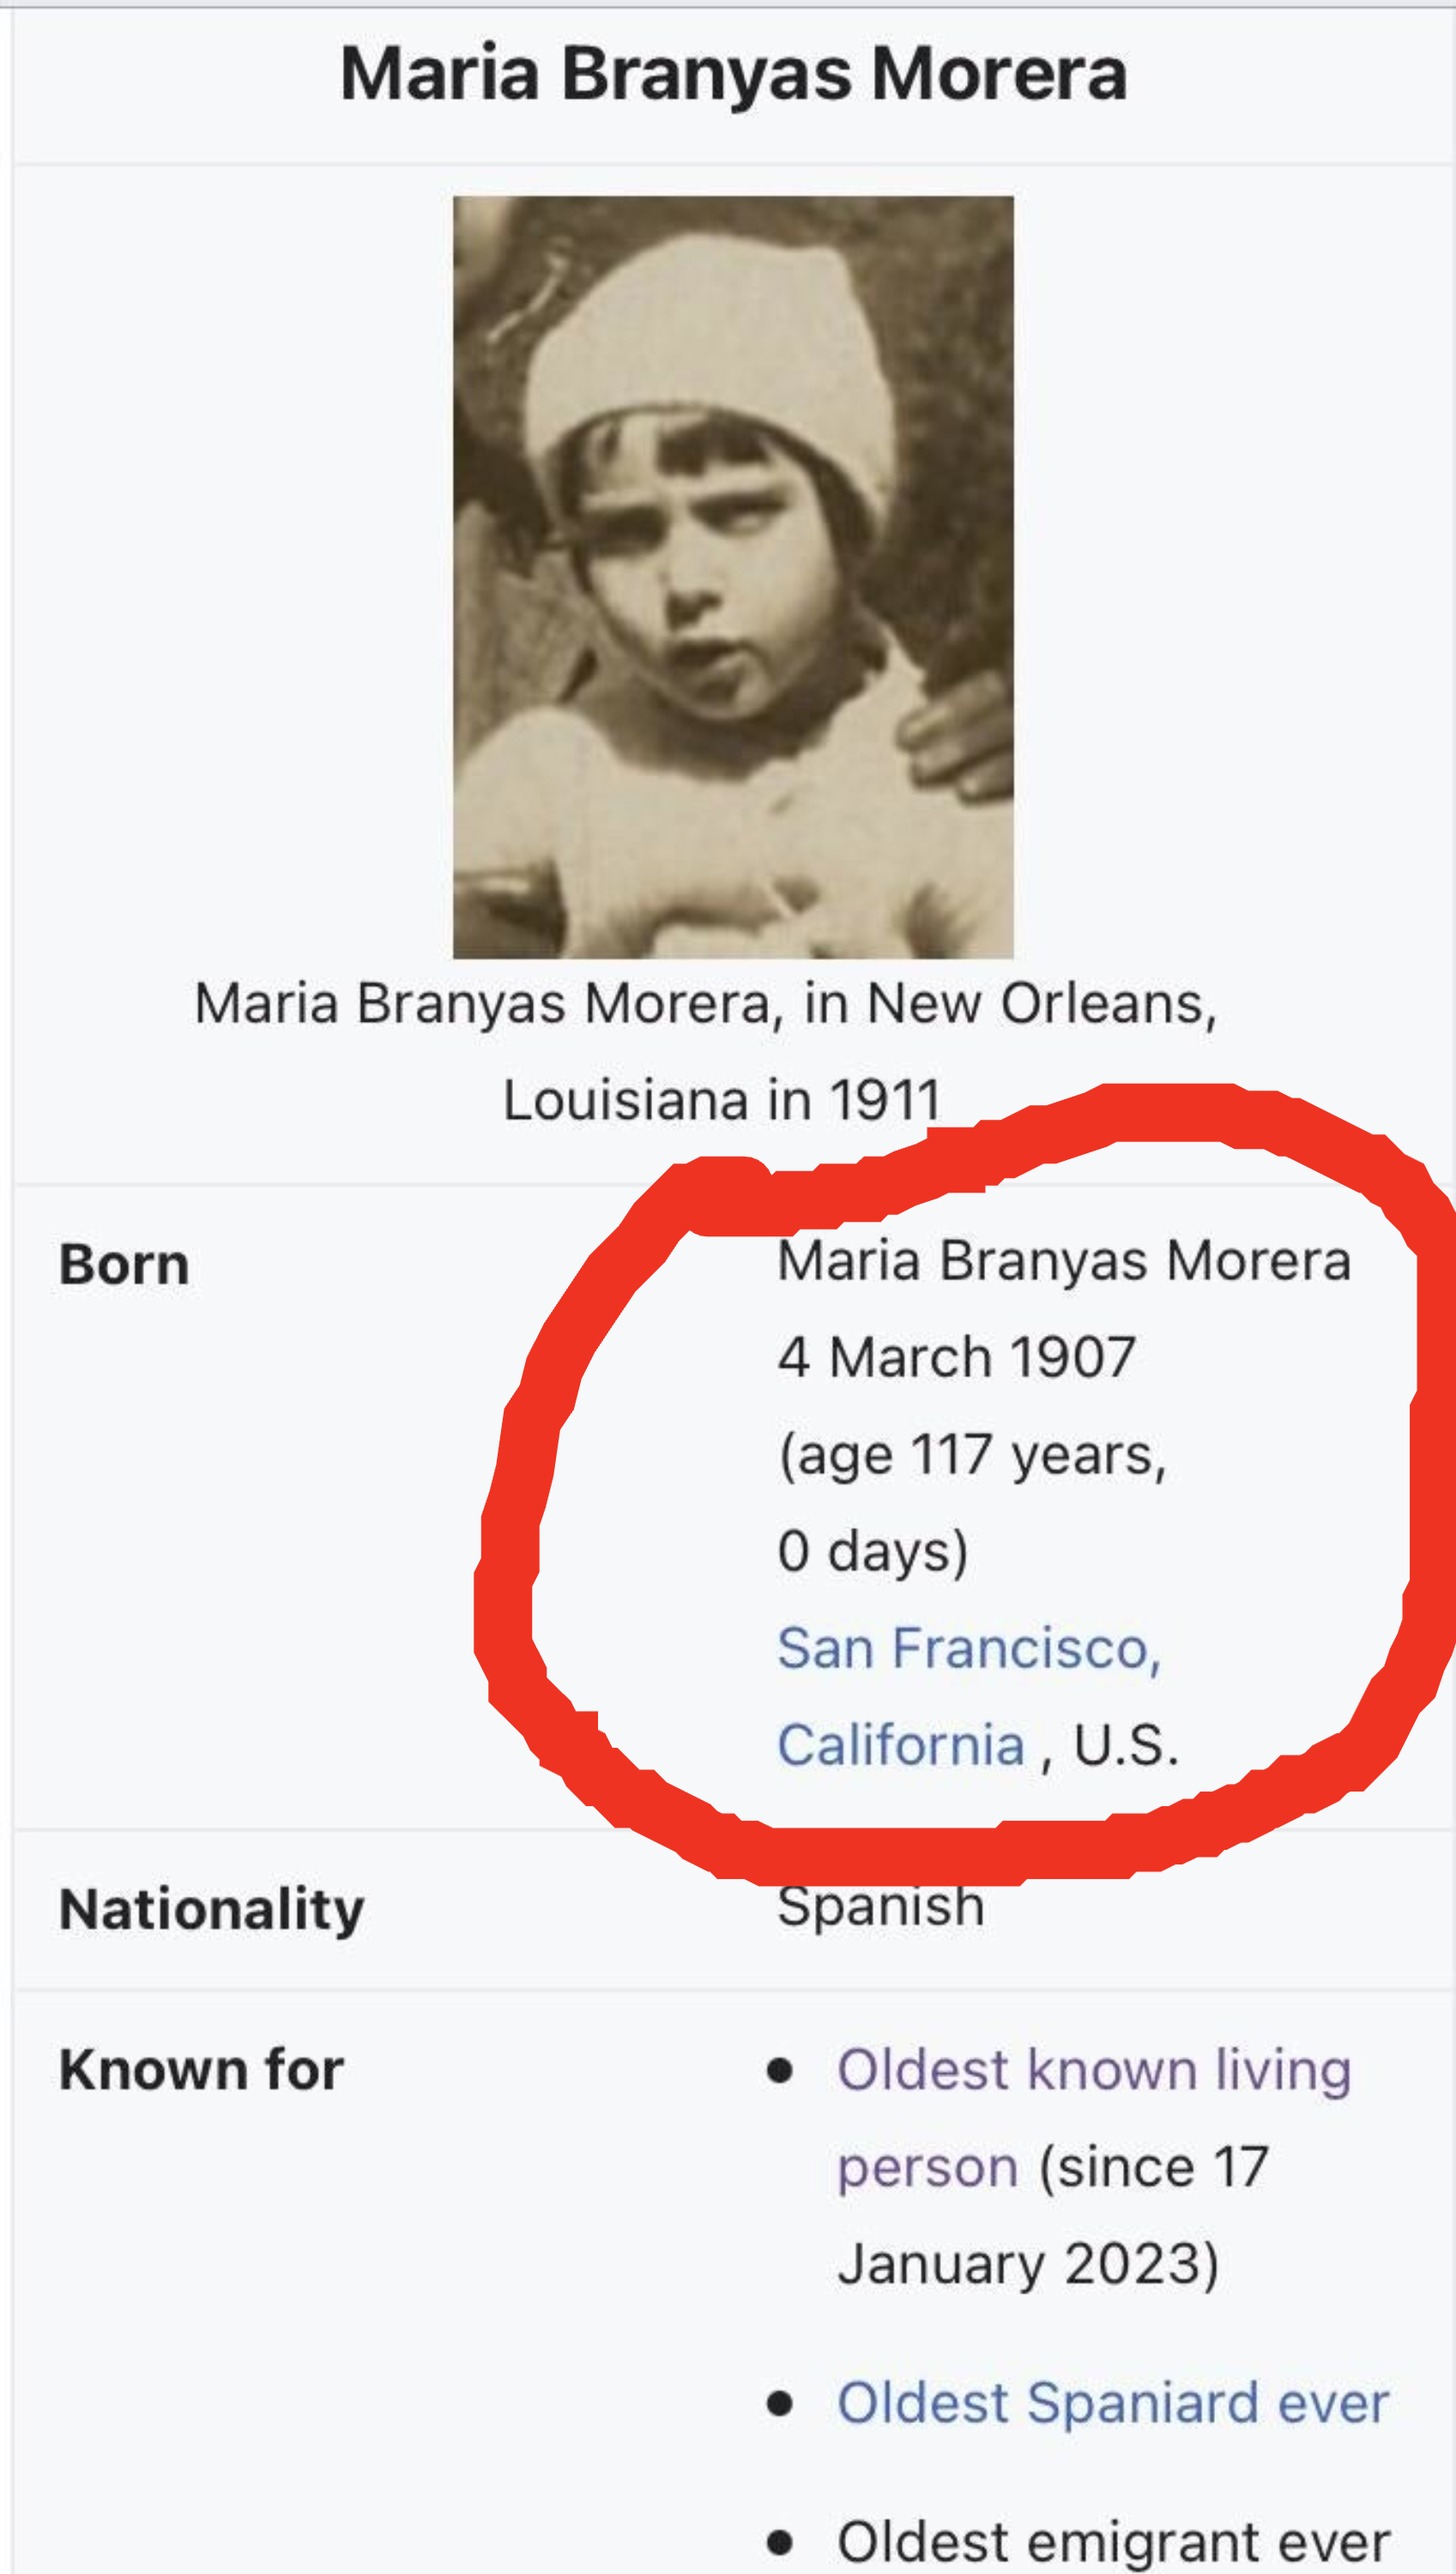 Maria Branyas Morena&#x27;s Wikipedia page section with photo and facts including birth date, March 4, 1907, and nationality, Spanish